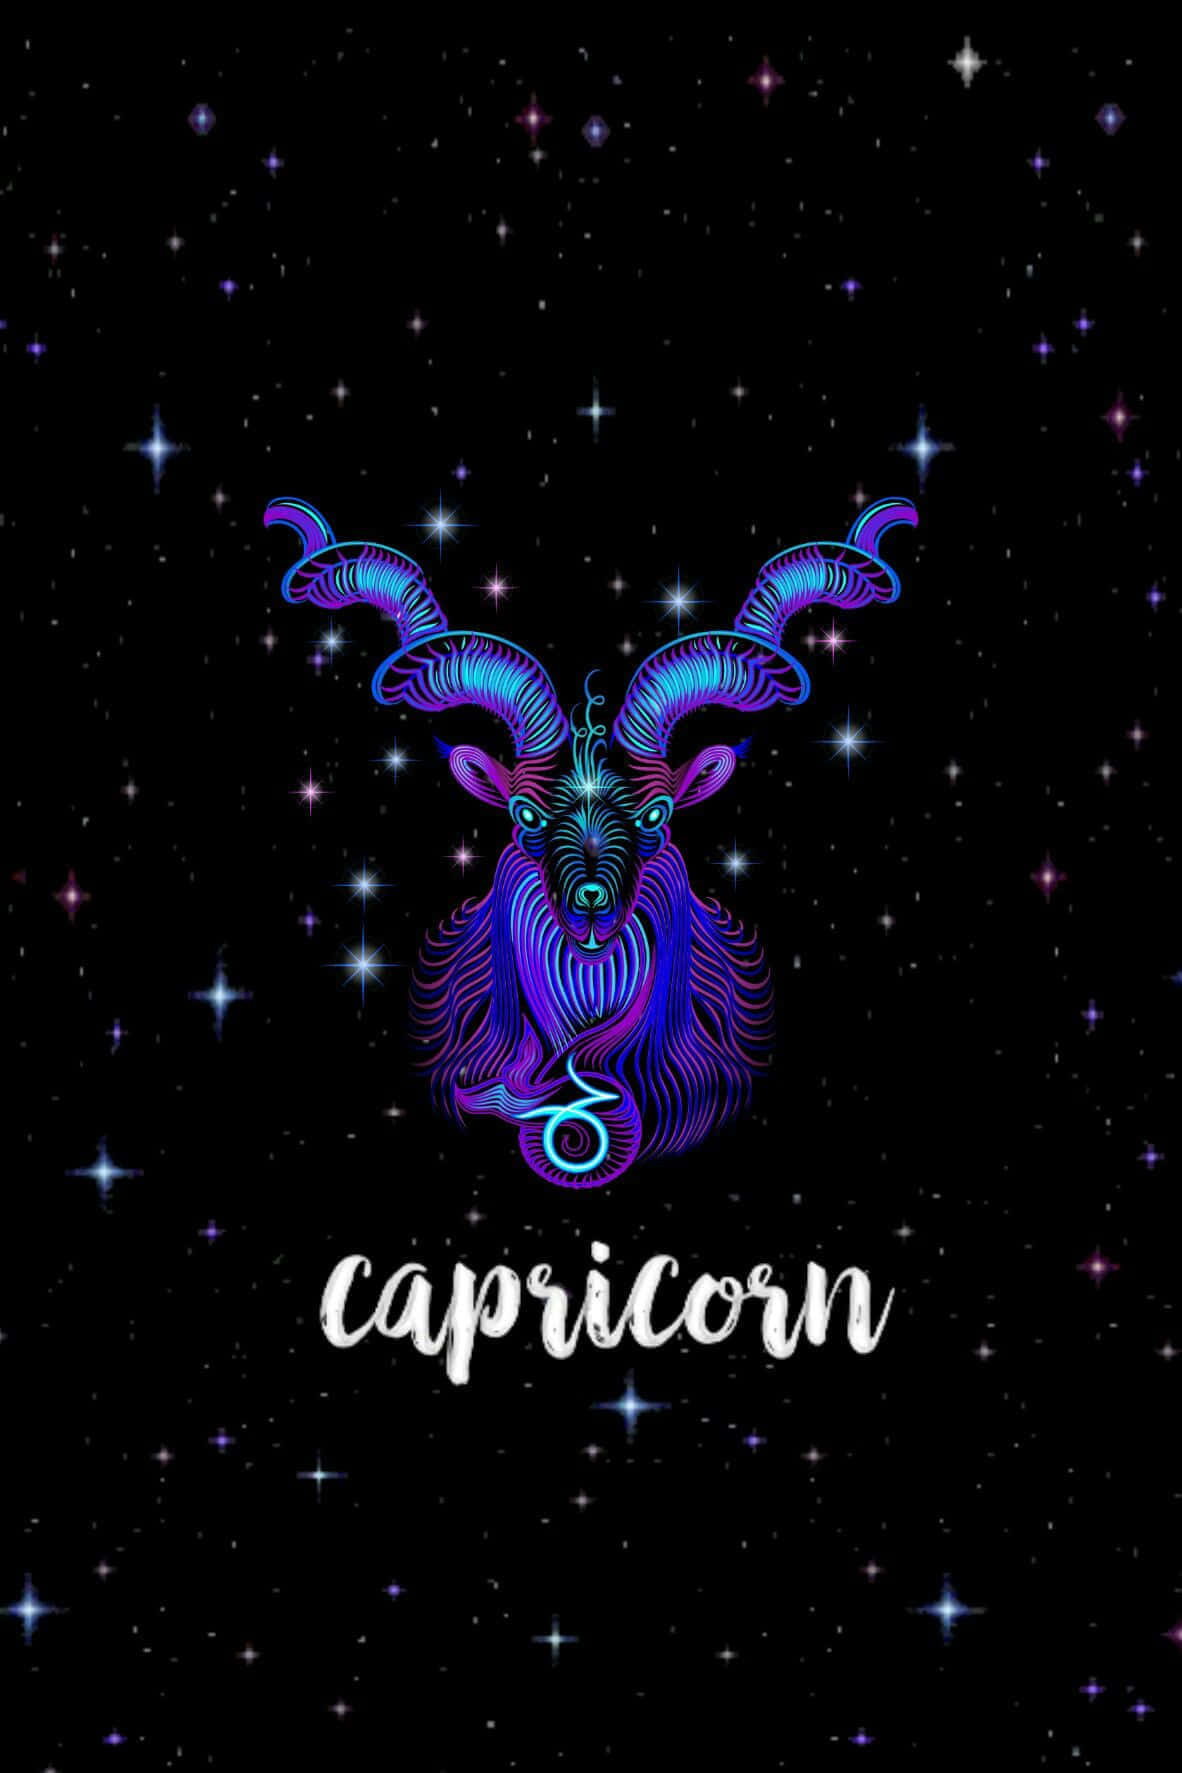 Follow the astrological signs to a new level of aesthetic! Wallpaper